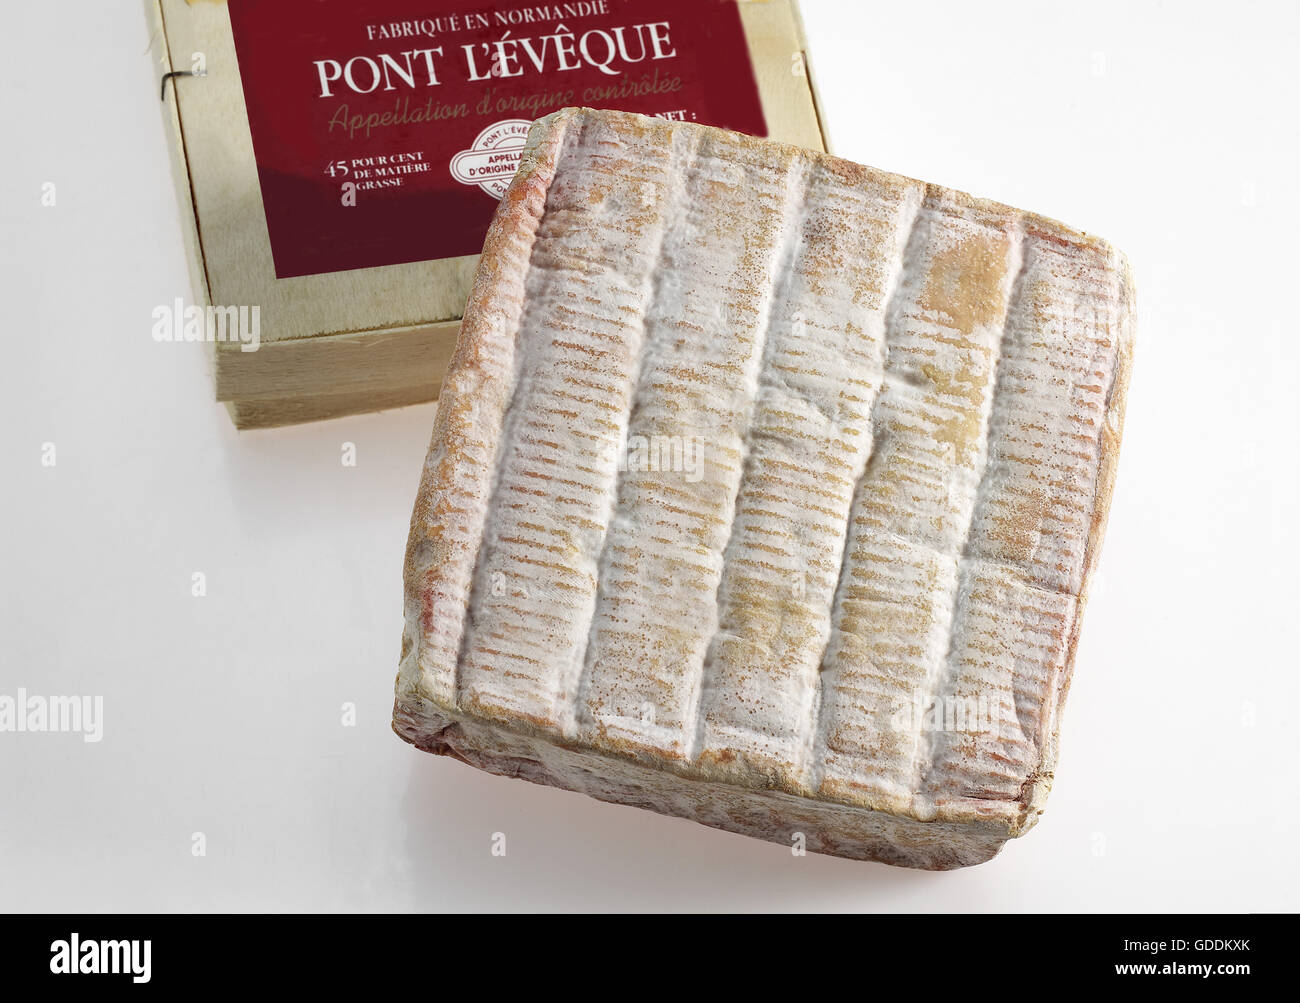 Pont l'Eveque, French Cheese from Normandy produced from Cow's Milk Stock Photo